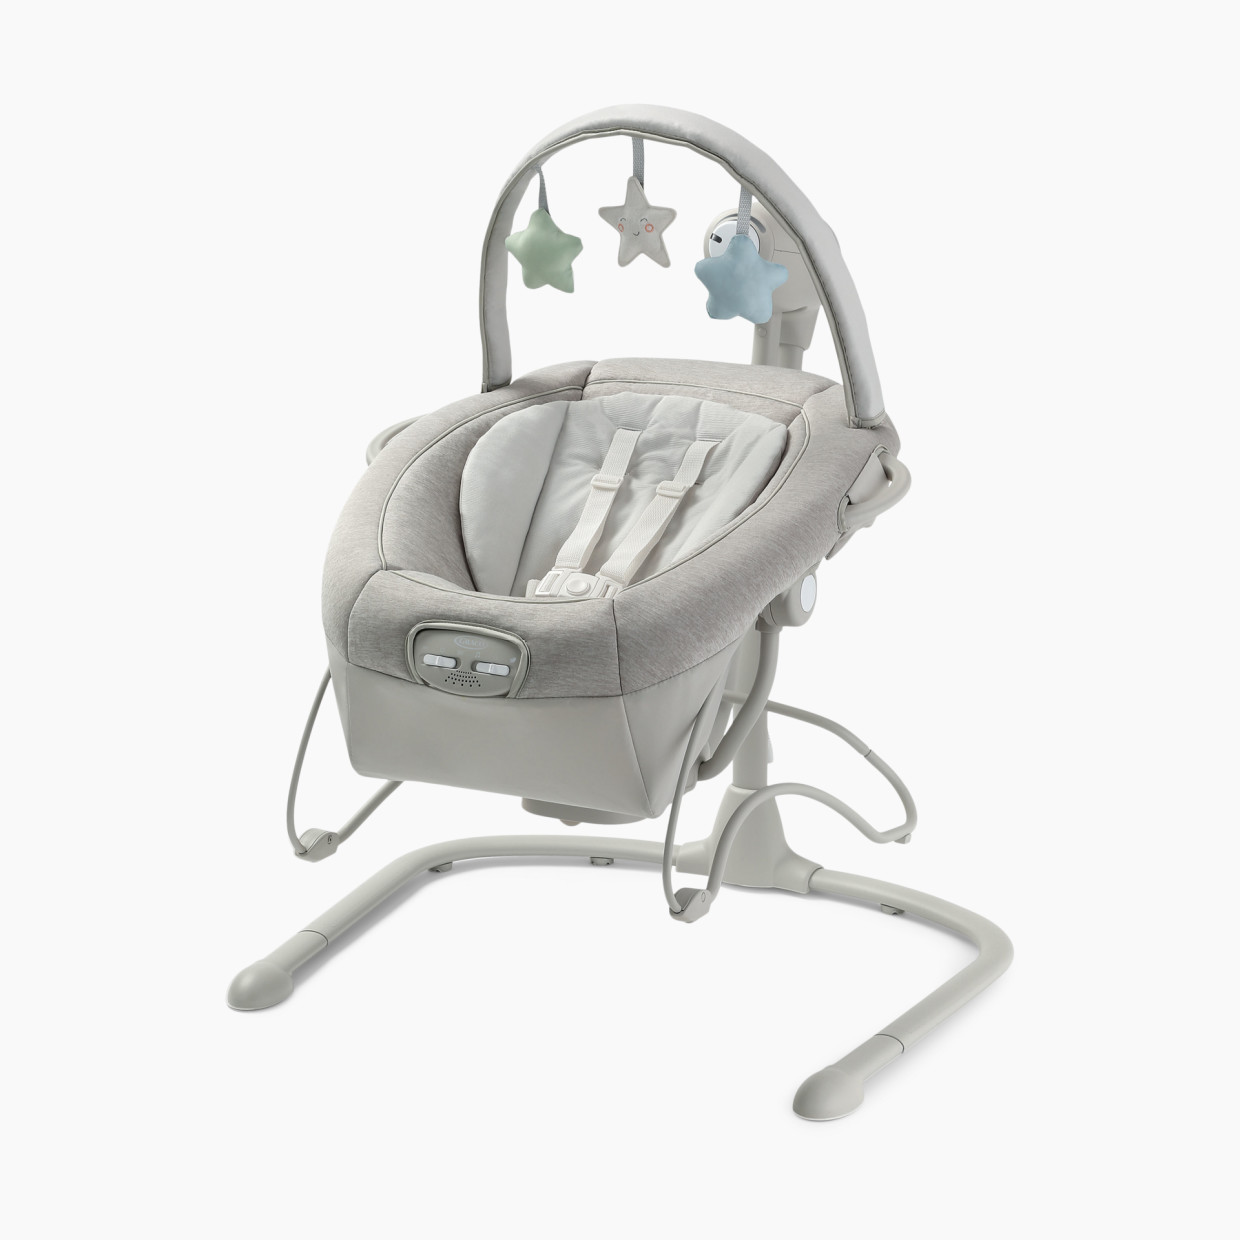 Graco Soothe 'n Sway LX Swing with Portable Bouncer - Modern Cottage Collection.